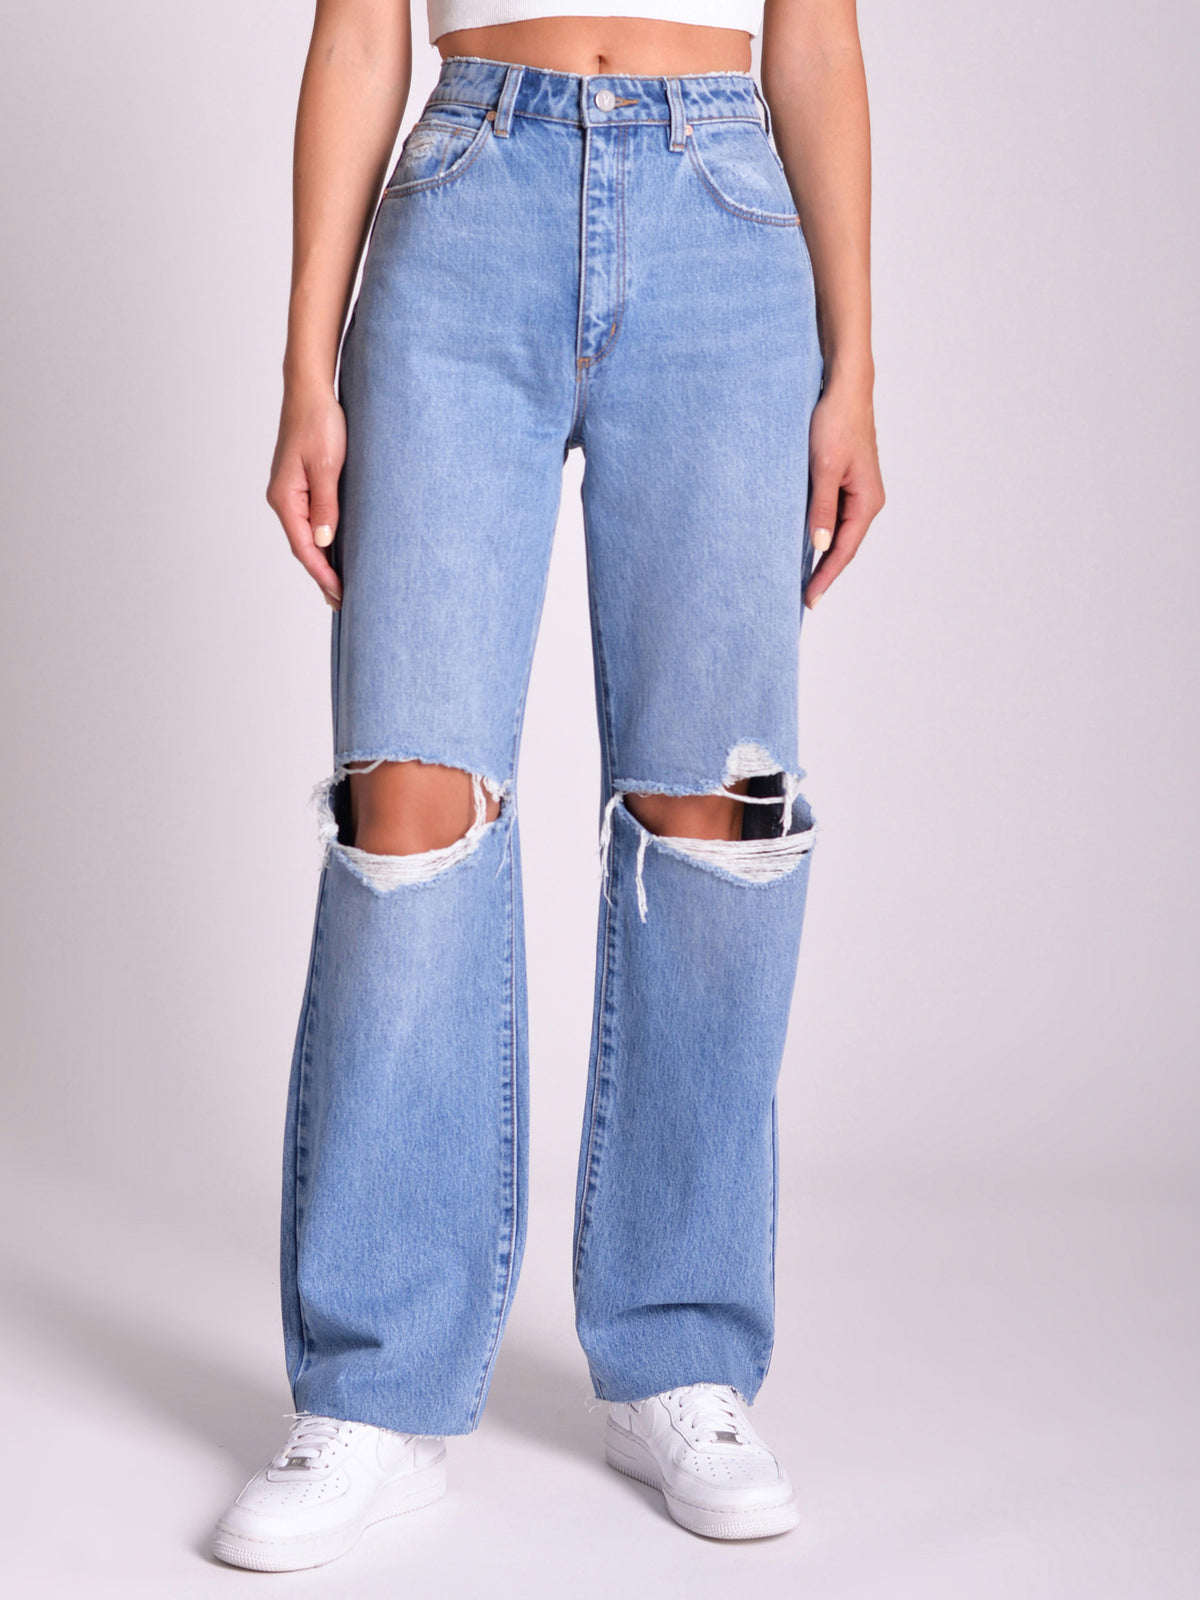 Carrie Britt Rip Recycled Jeans in Mid Vintage Blue